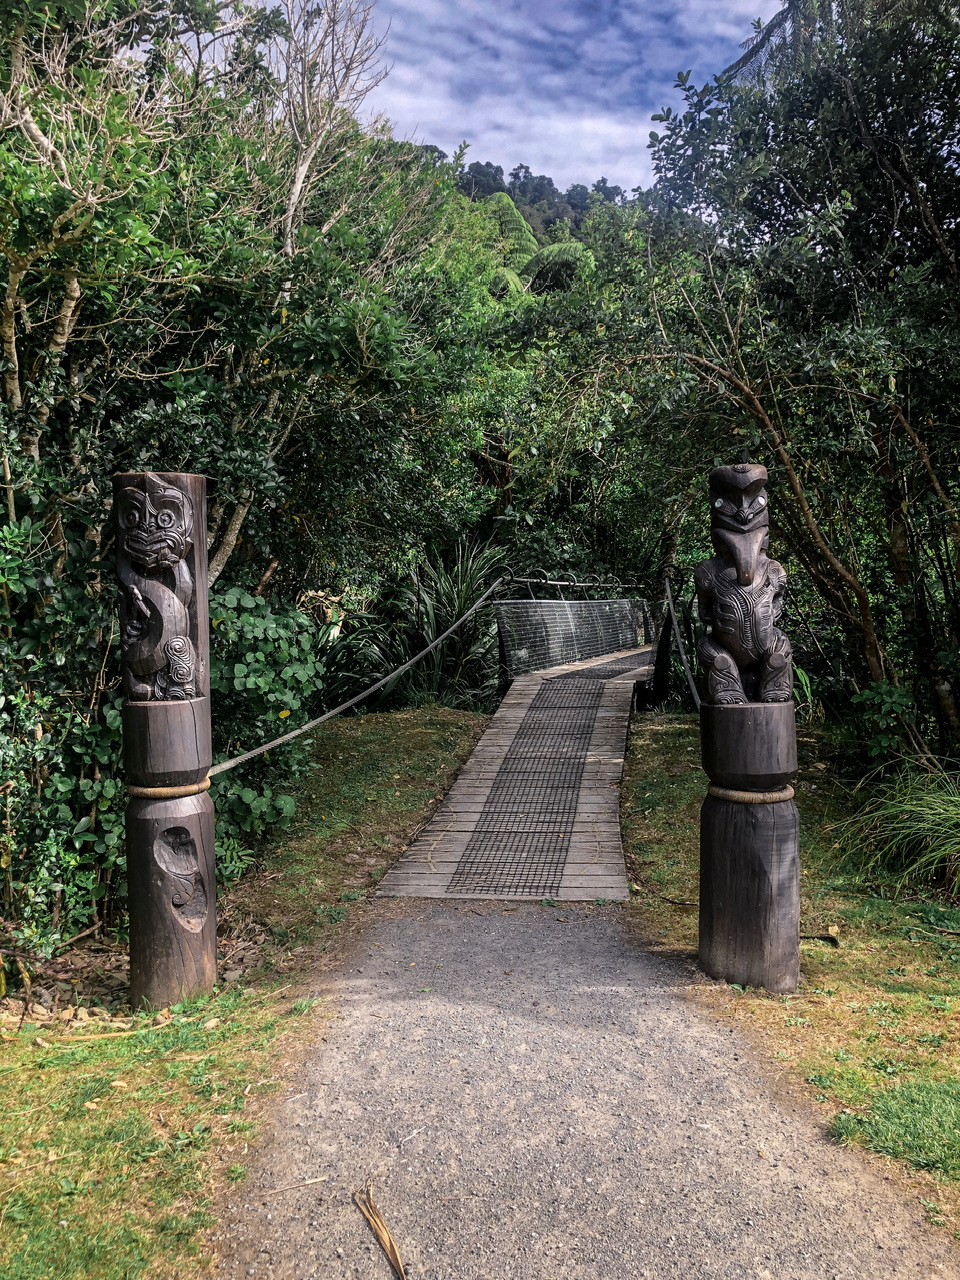 Two Māori totem carvings of around 6 feet in height stand with a path which leads to a footbridge running between them, through native New Zealand bush in Ship Cove.